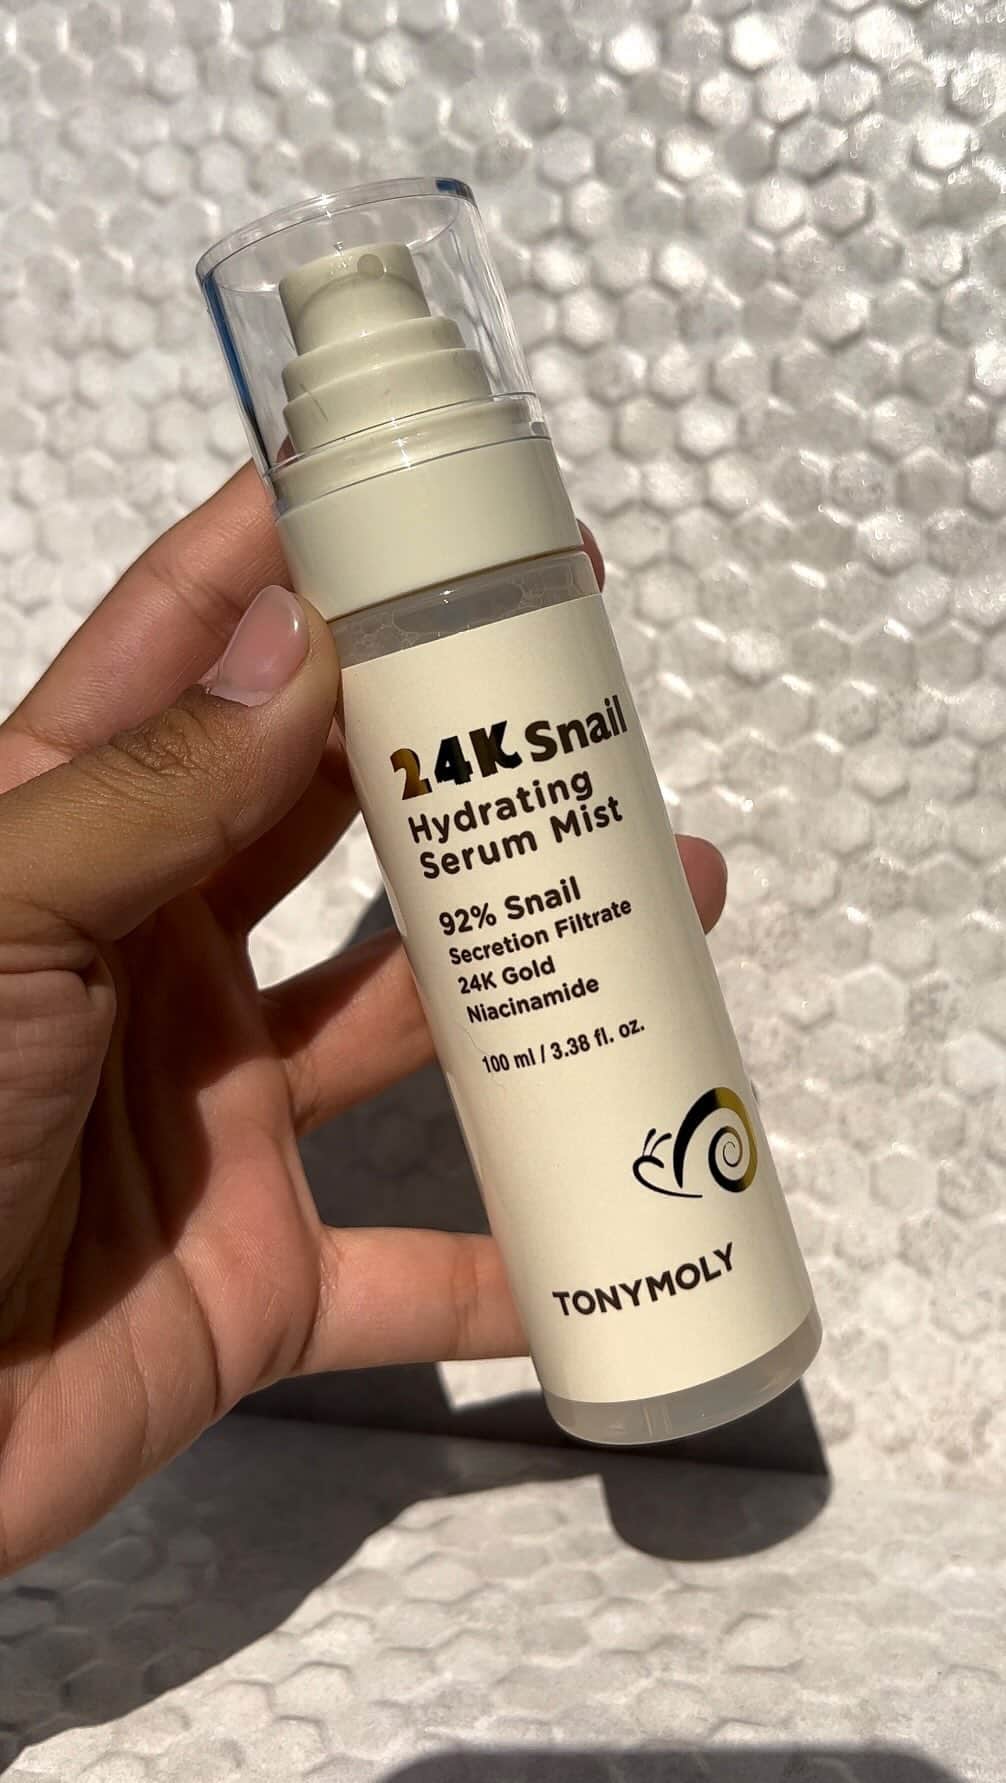 TONYMOLY USA Officialのインスタグラム：「Did someone say 92% snail? 🐌✨ Unlike other mists that are mostly water, our 24K Snail Hydrating Serum Mist is formulated with 92.3% snail secretion filtrate, the ultimate glow-boosting ingredient! Get ready to drench your skin in hydration and glow like never before! 💧🌟 #xoxoTM #TONYMOLYnMe #24ksnailmagic」